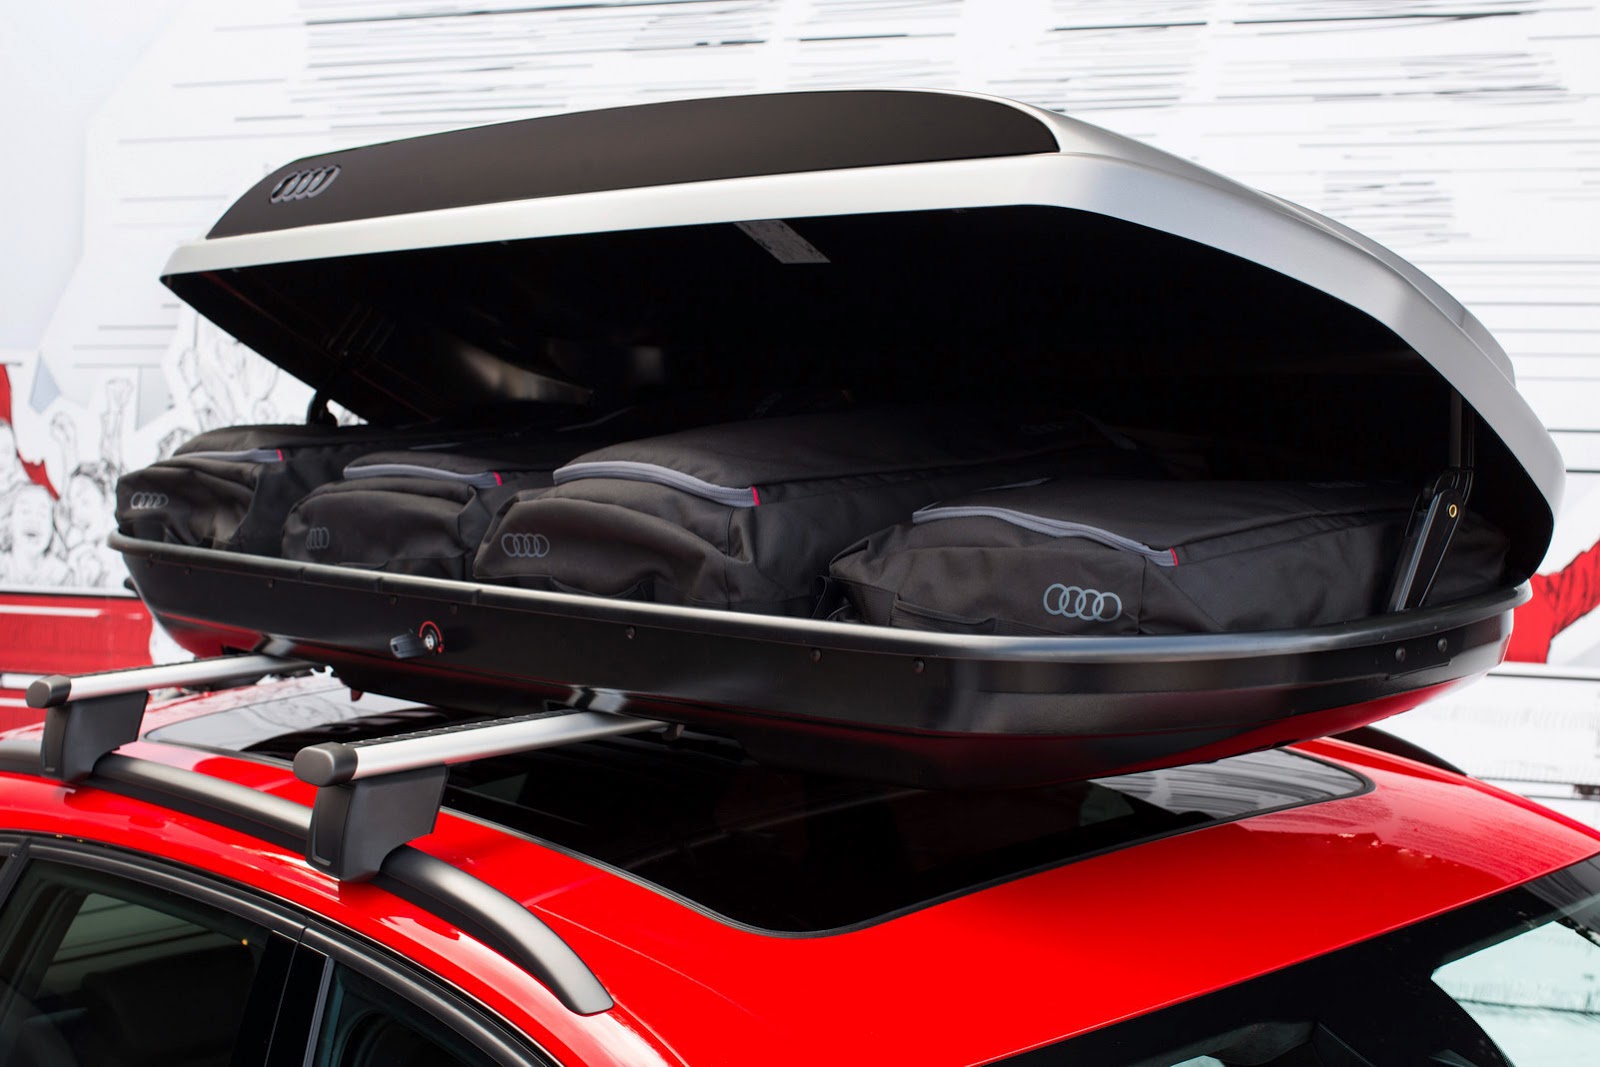 Audi Brings Out Q3 Camping Tent Concept and Customized SQ5 and A1